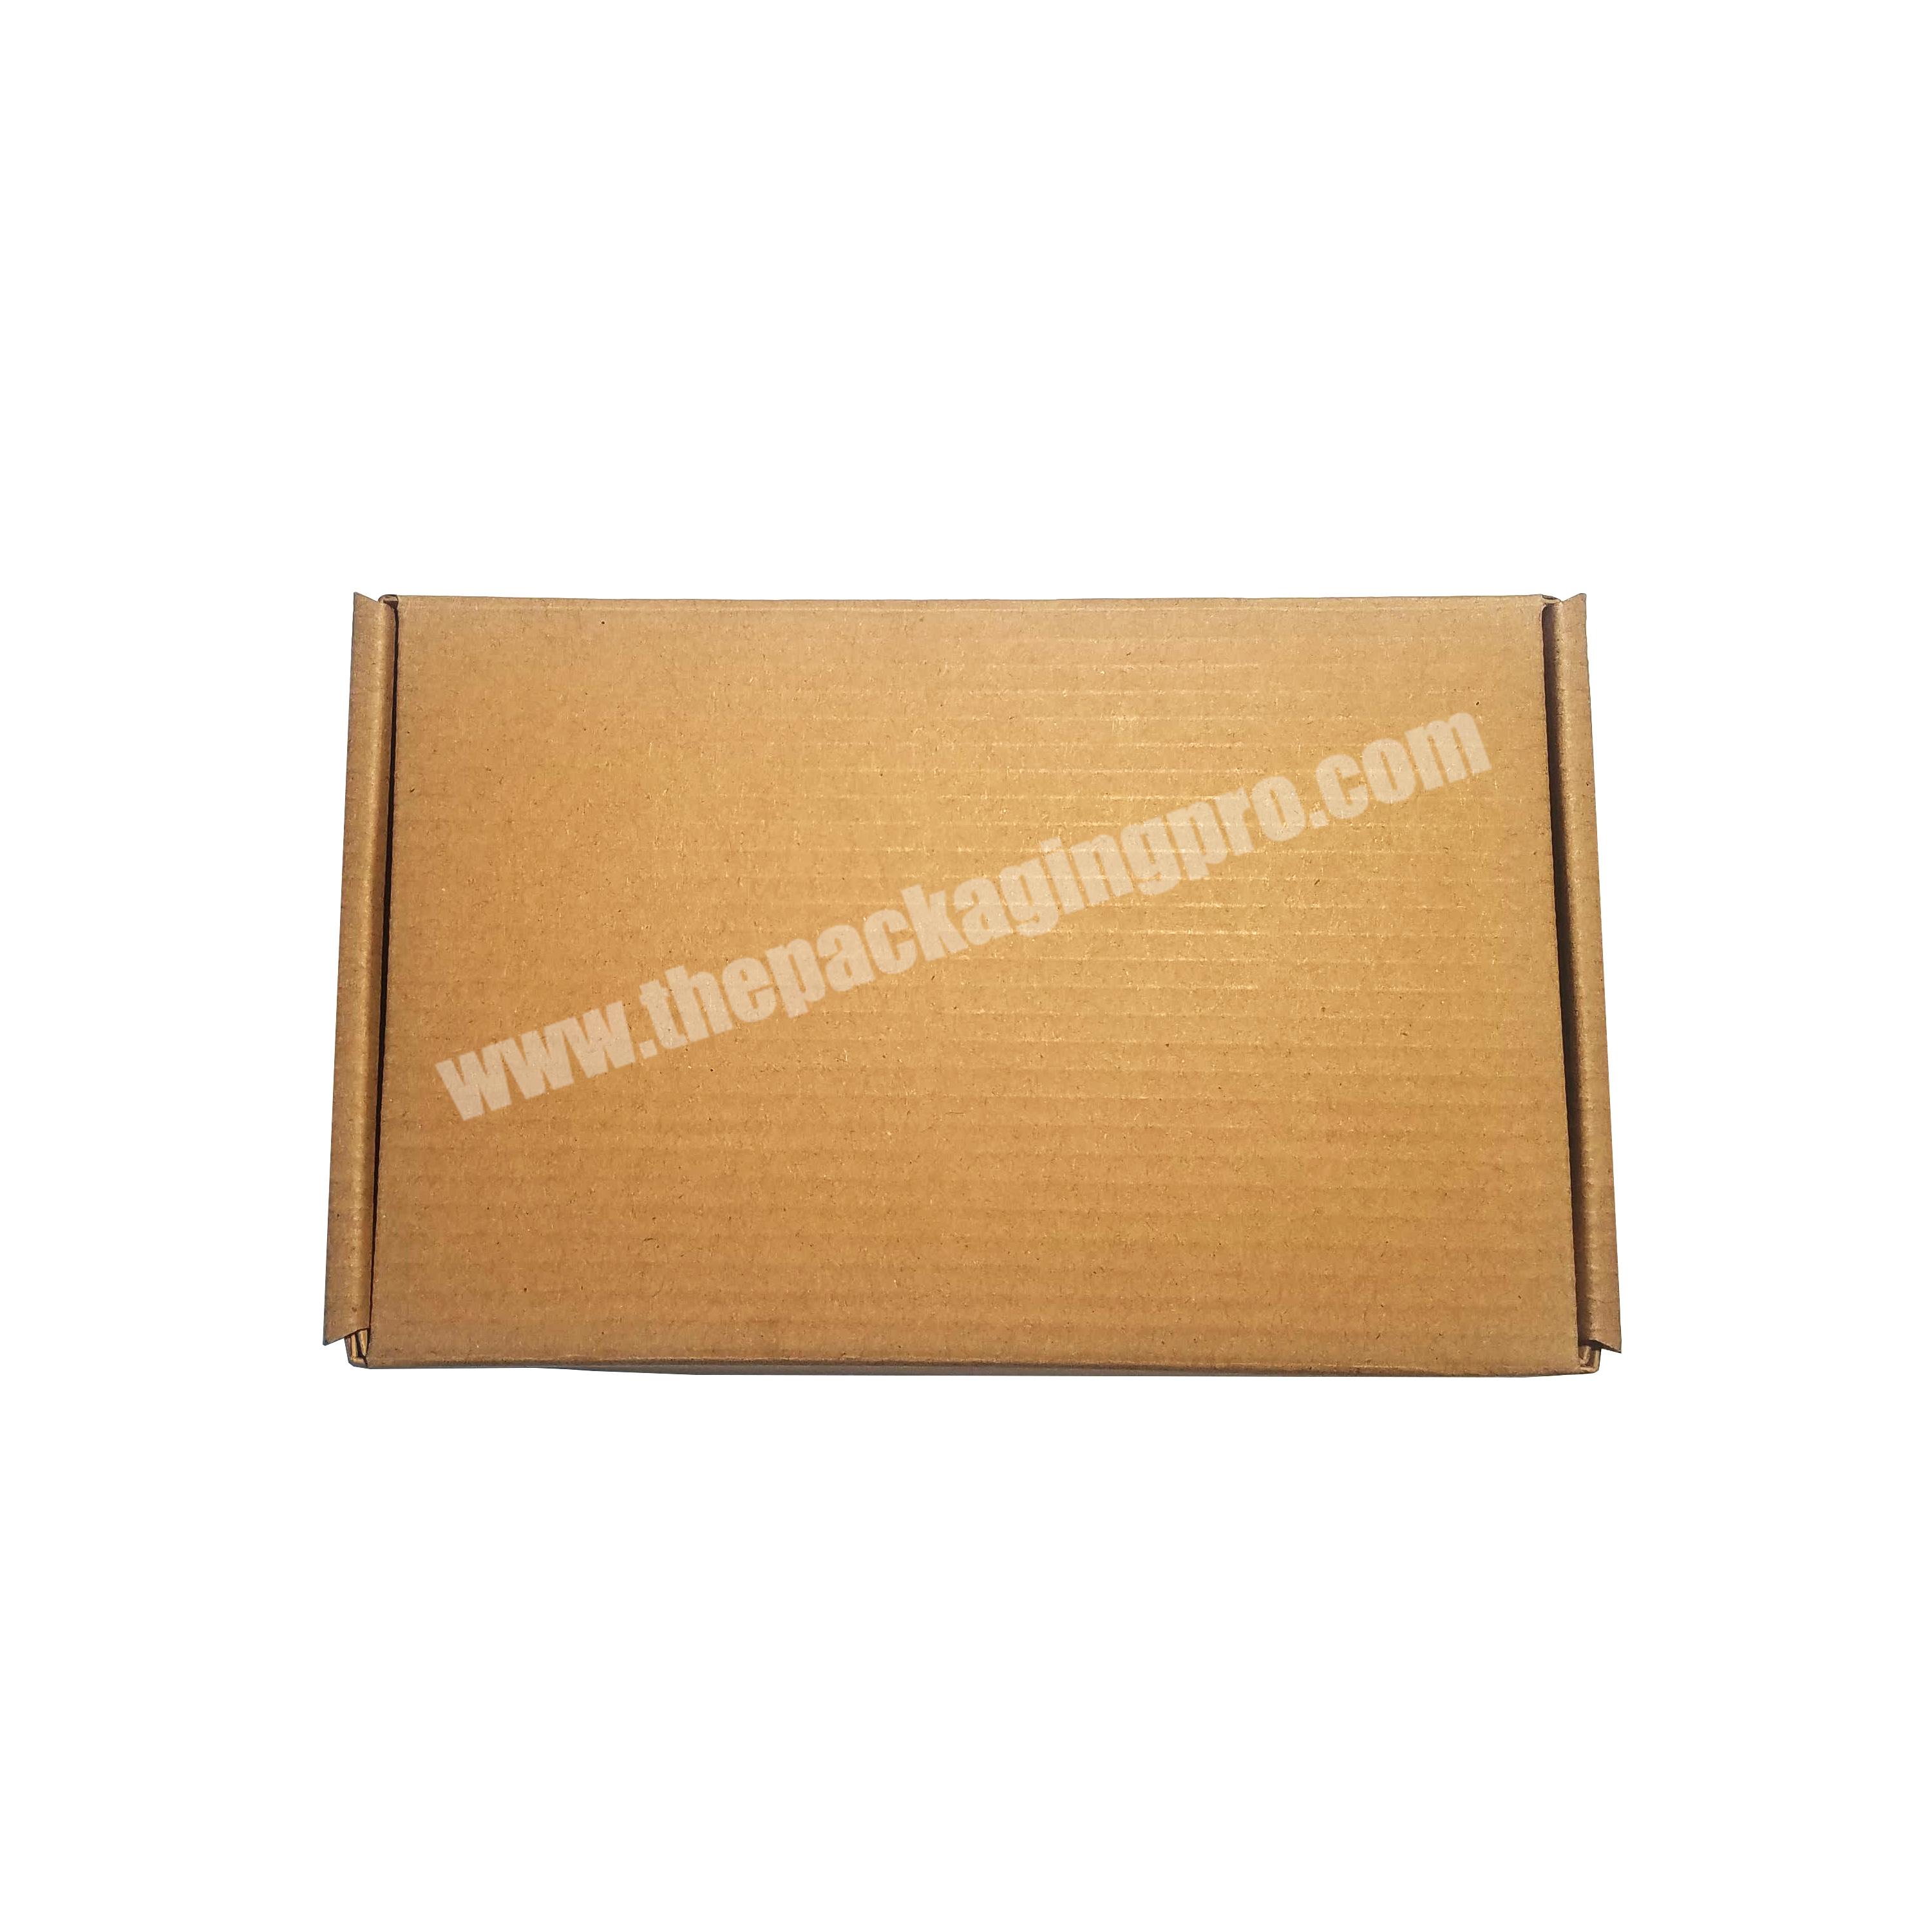 OEM Manufacture Cheap Durable Phone Case Shipping Mailer Box